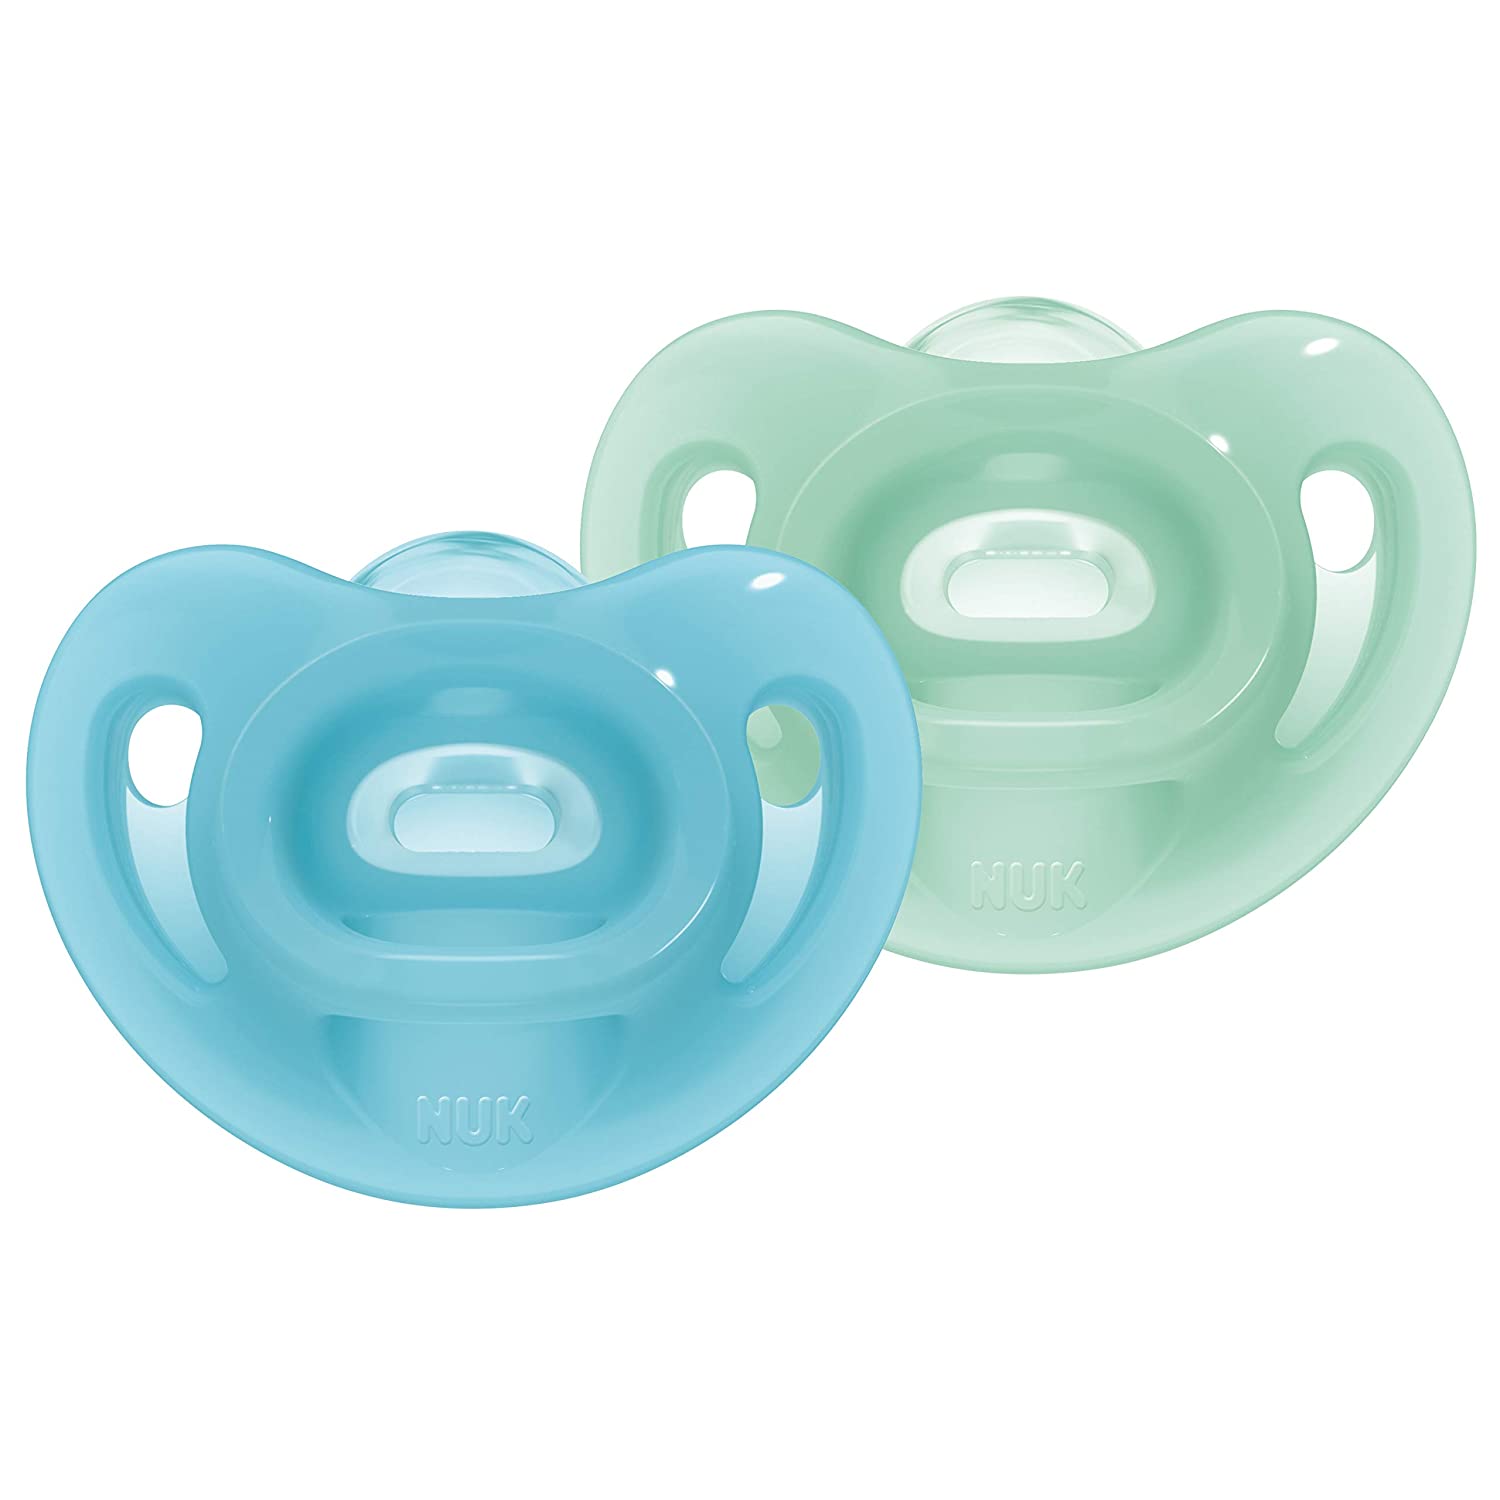 NUK Sensitive Pacifiers | 0-6 Months | 100% Silicone for Delicate Skin | BPA Free | Blue & Green | Pack of 2